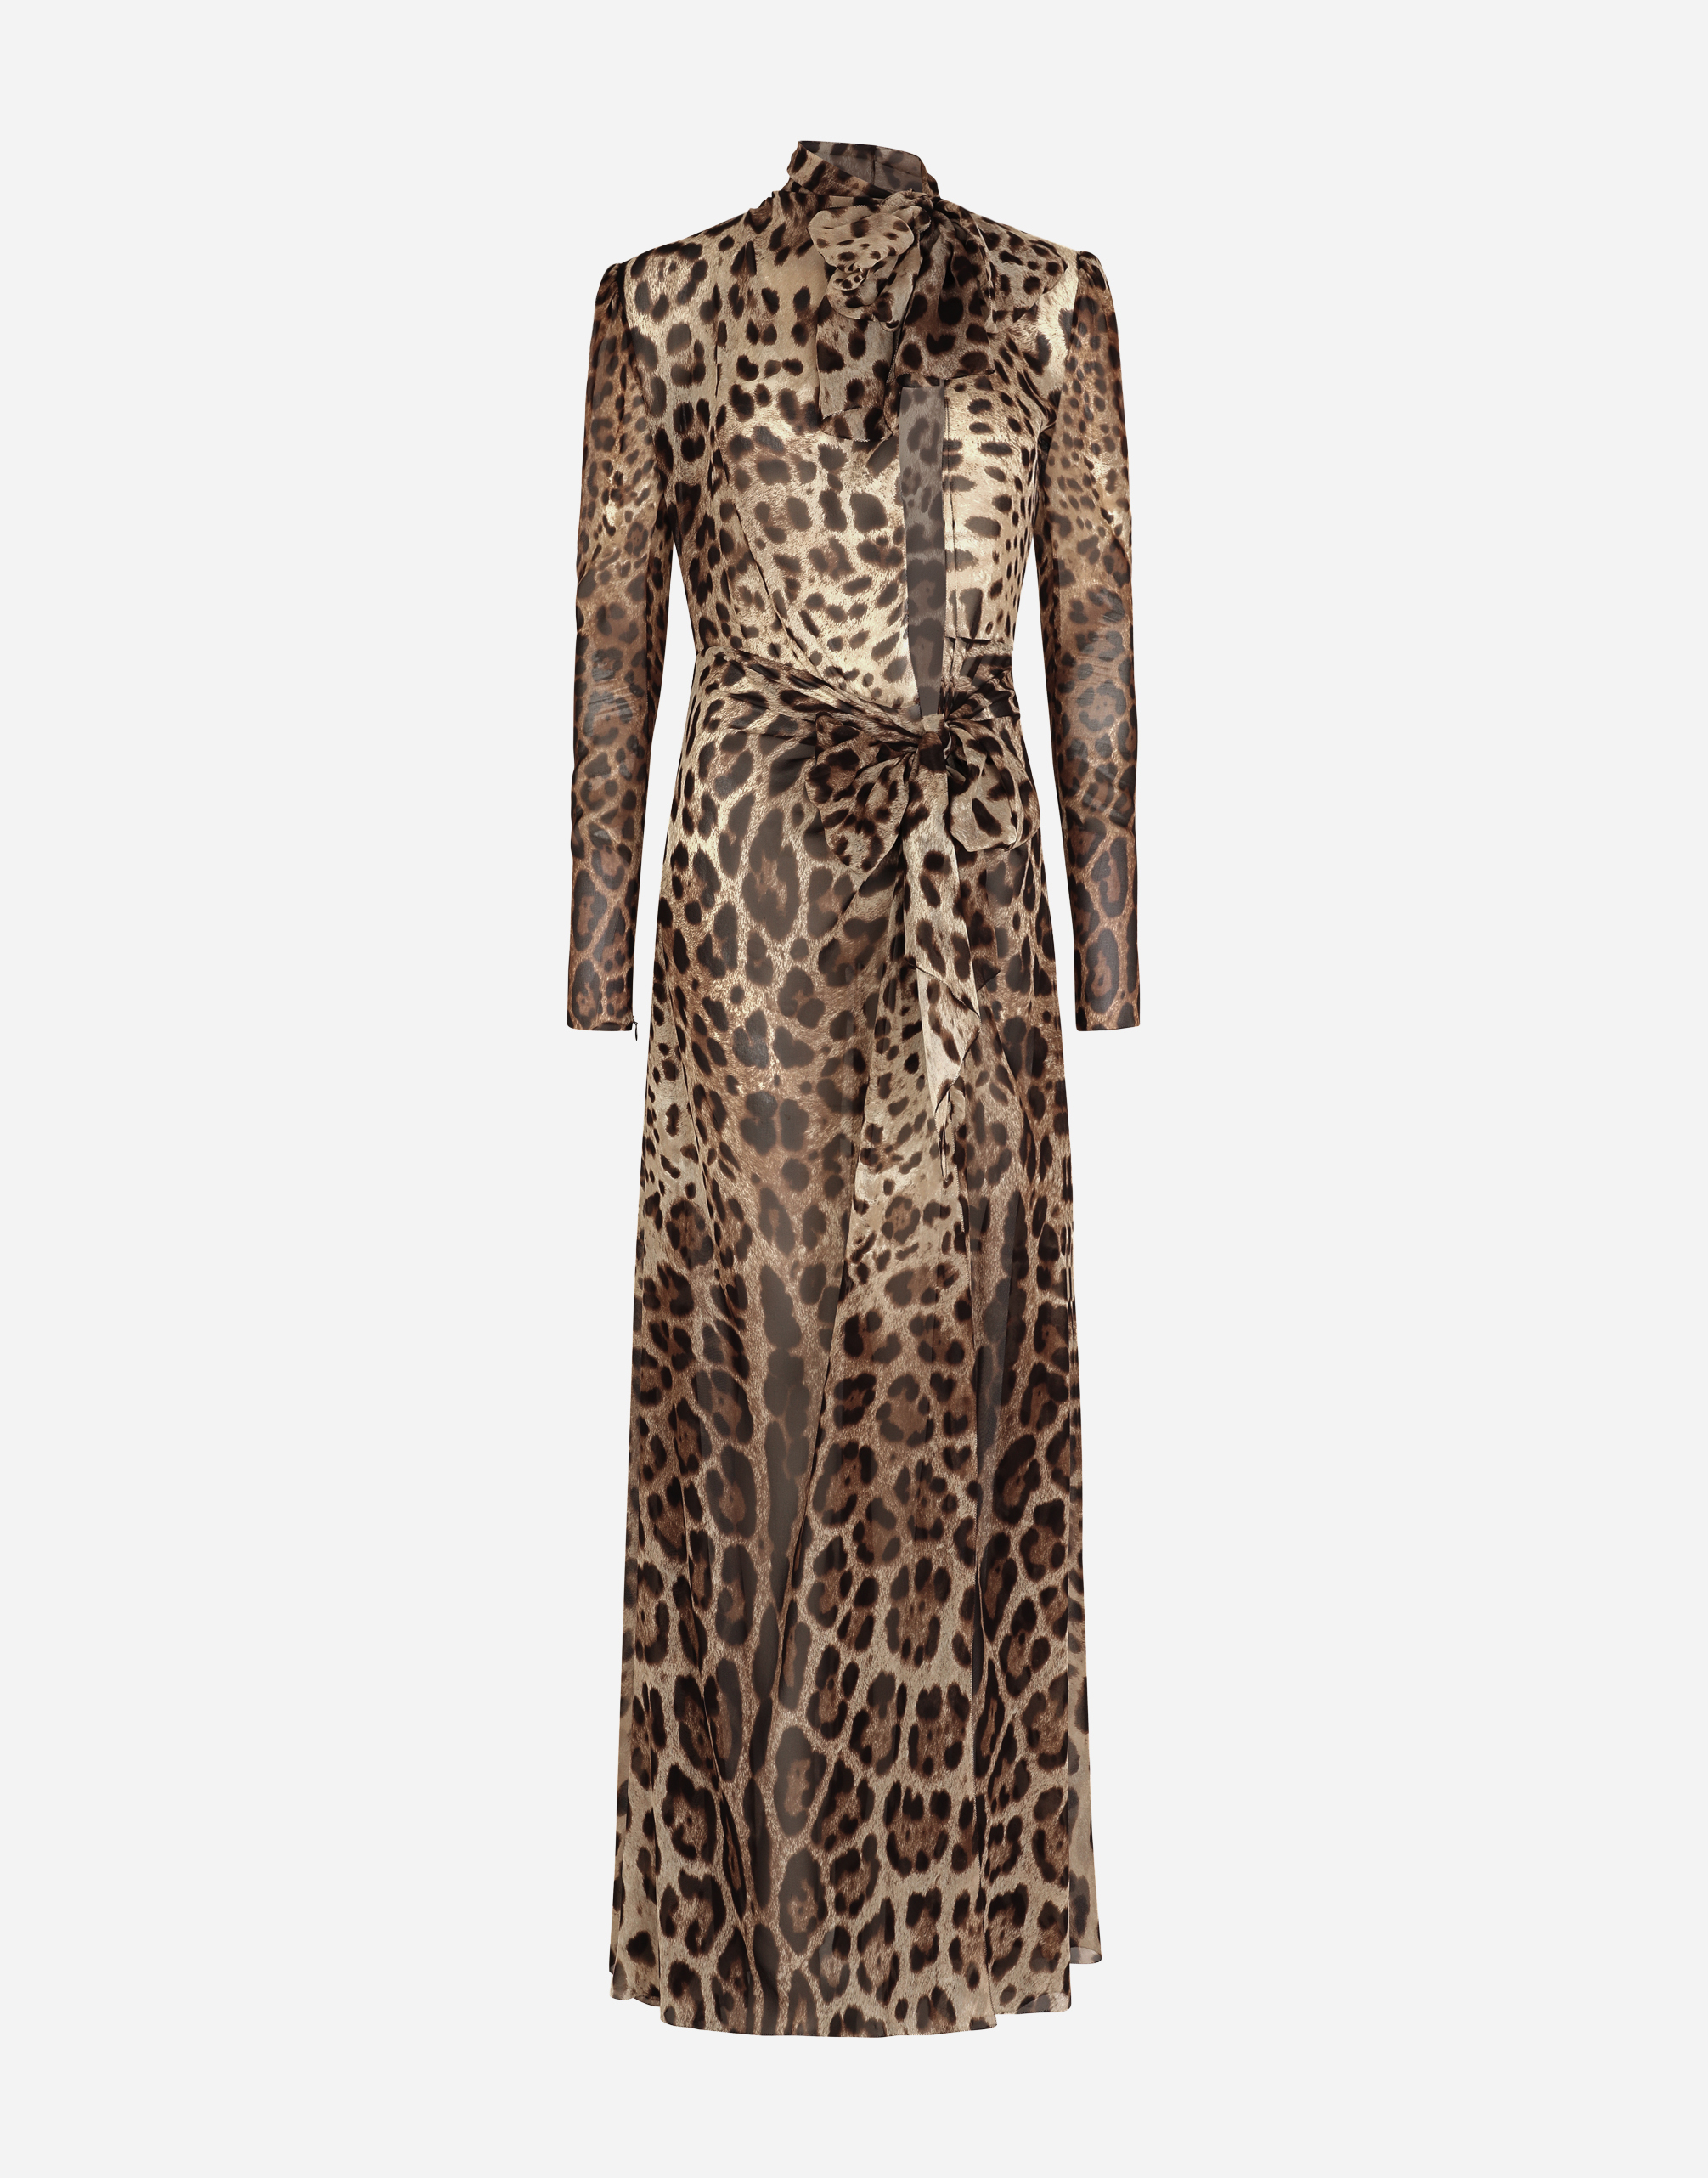 Georgette dress with leopard print and tie details in Animal Print